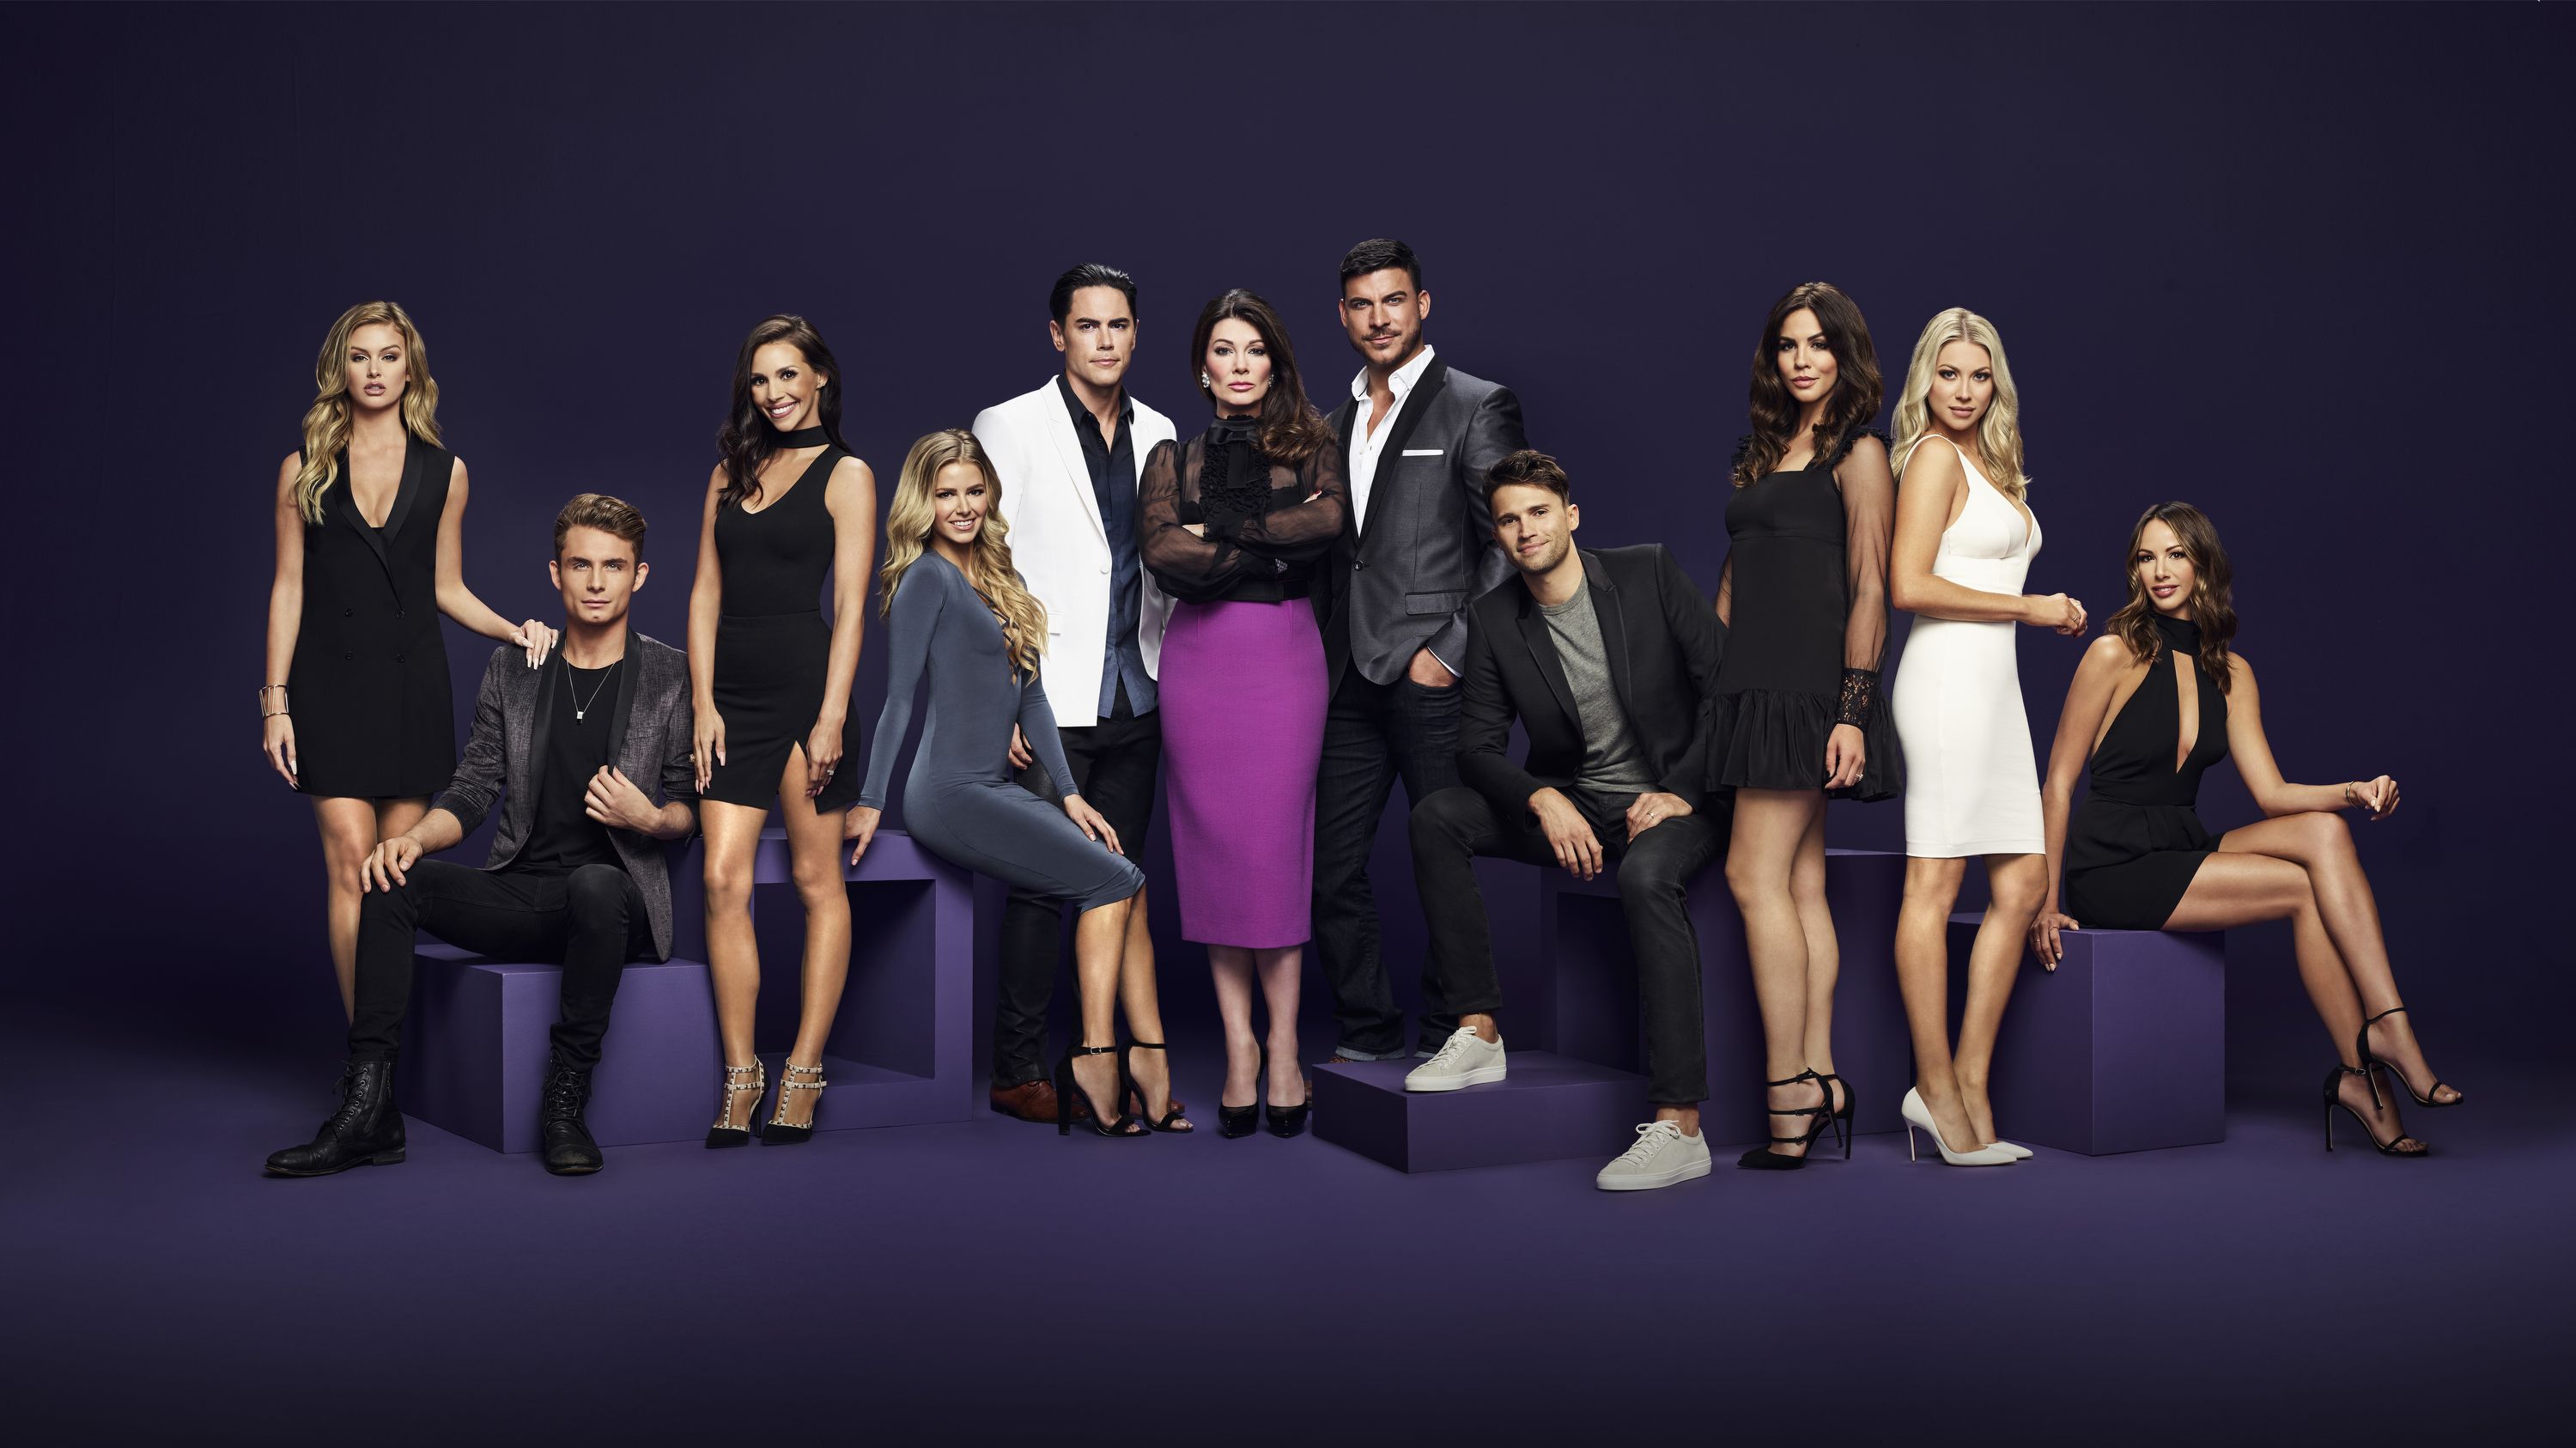 Vanderpump Rules Cheating Drama — All the Times Vanderpump Rules Cast Cheated pic